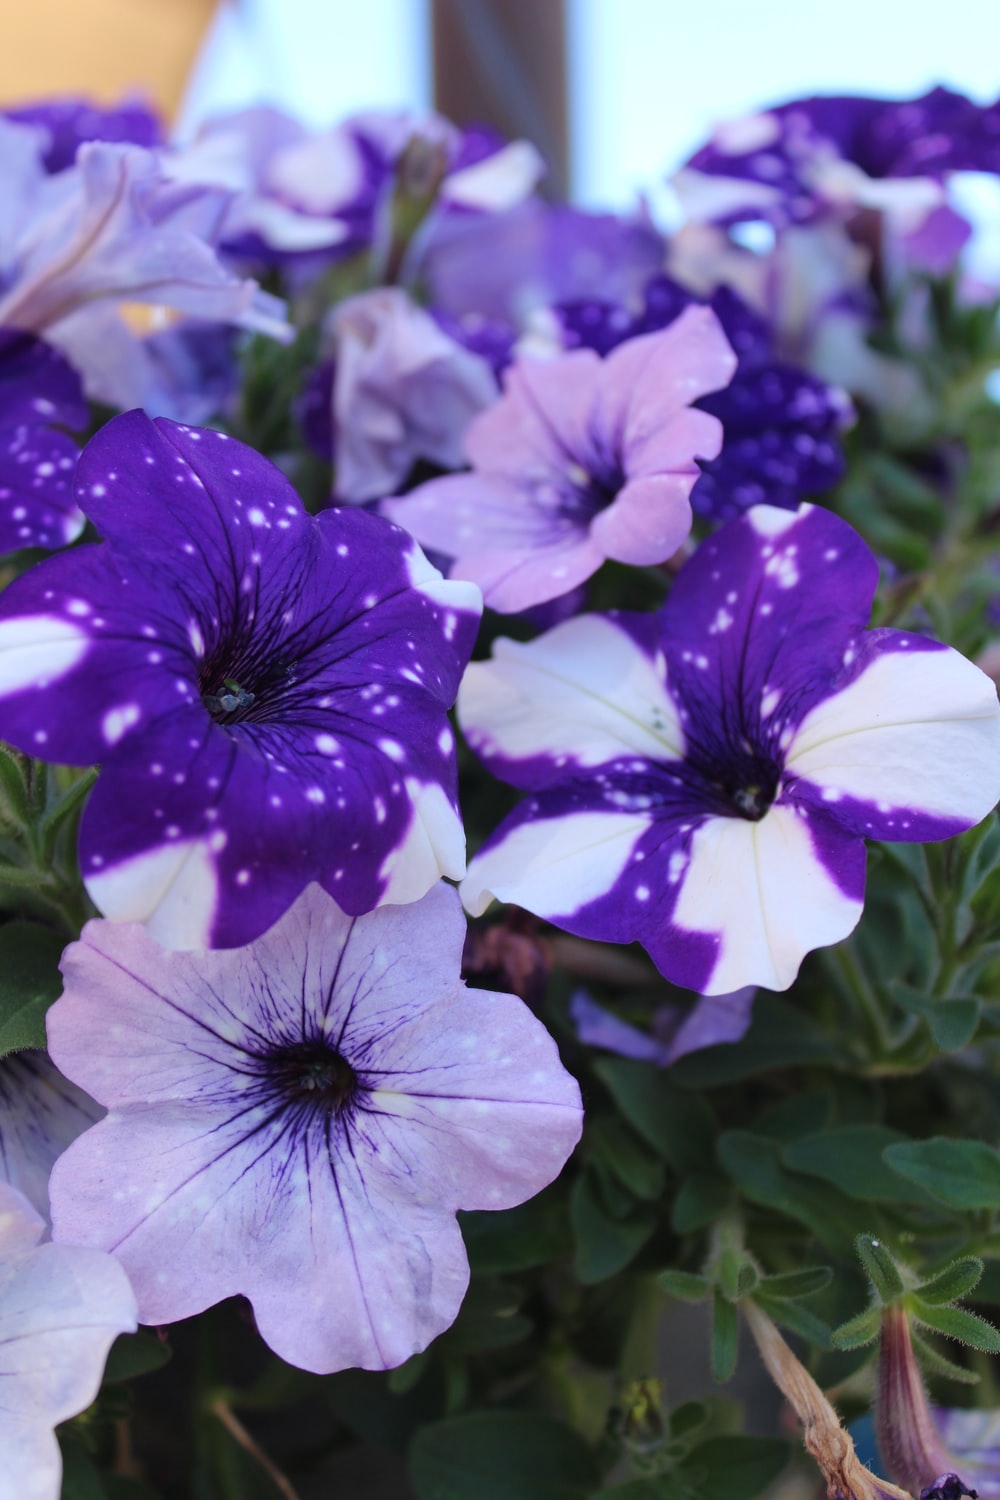 Petunia Picture. Download Free Image